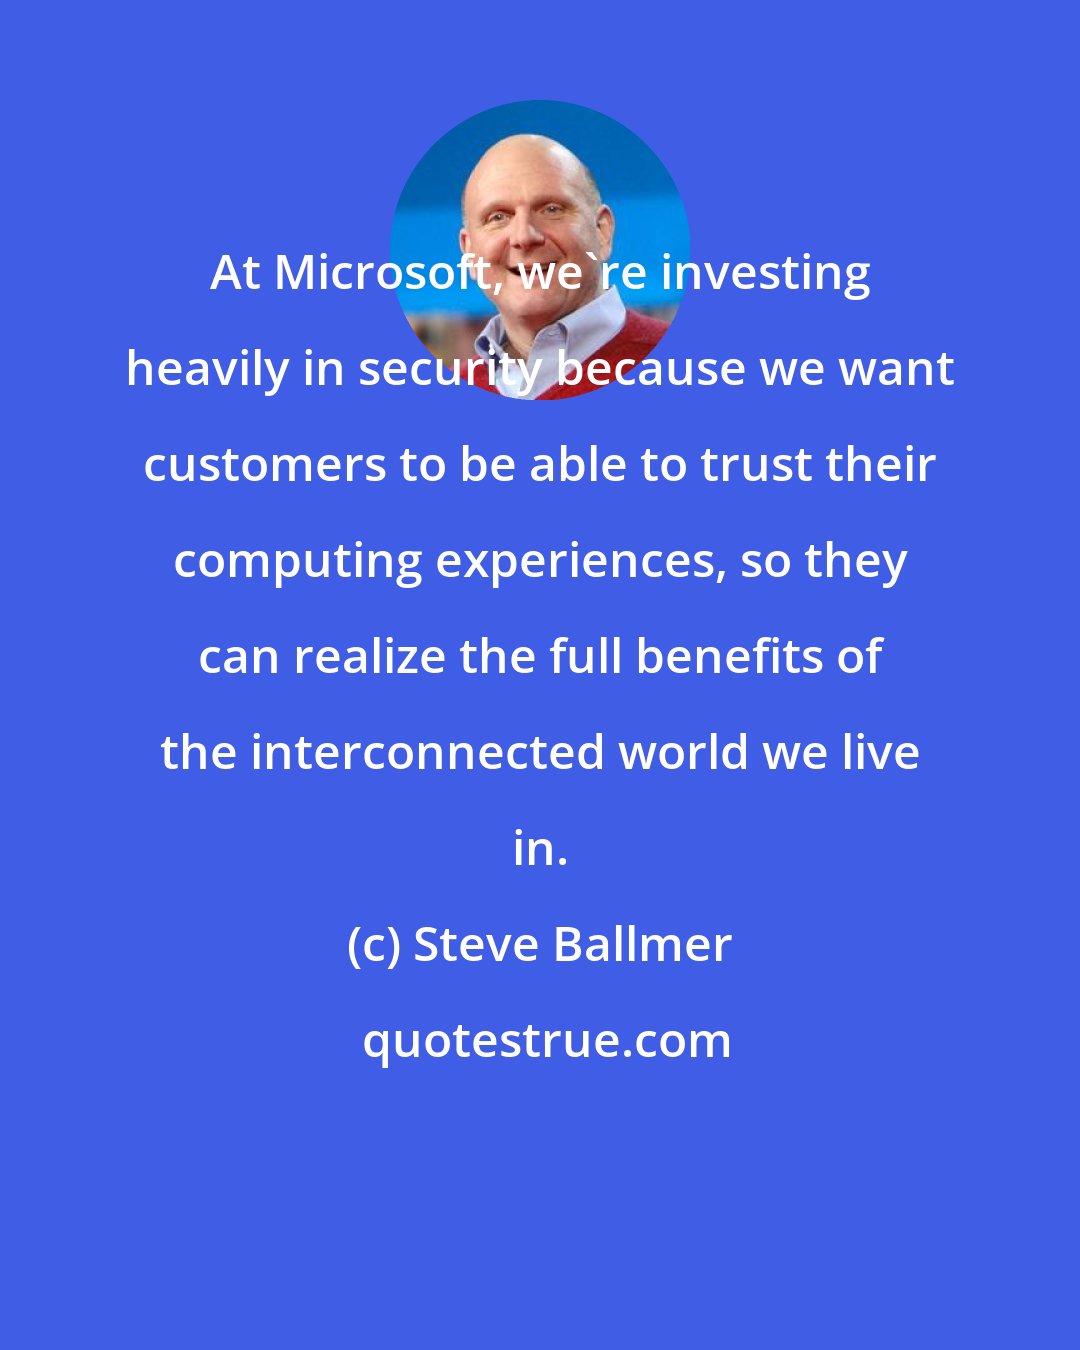 Steve Ballmer: At Microsoft, we're investing heavily in security because we want customers to be able to trust their computing experiences, so they can realize the full benefits of the interconnected world we live in.